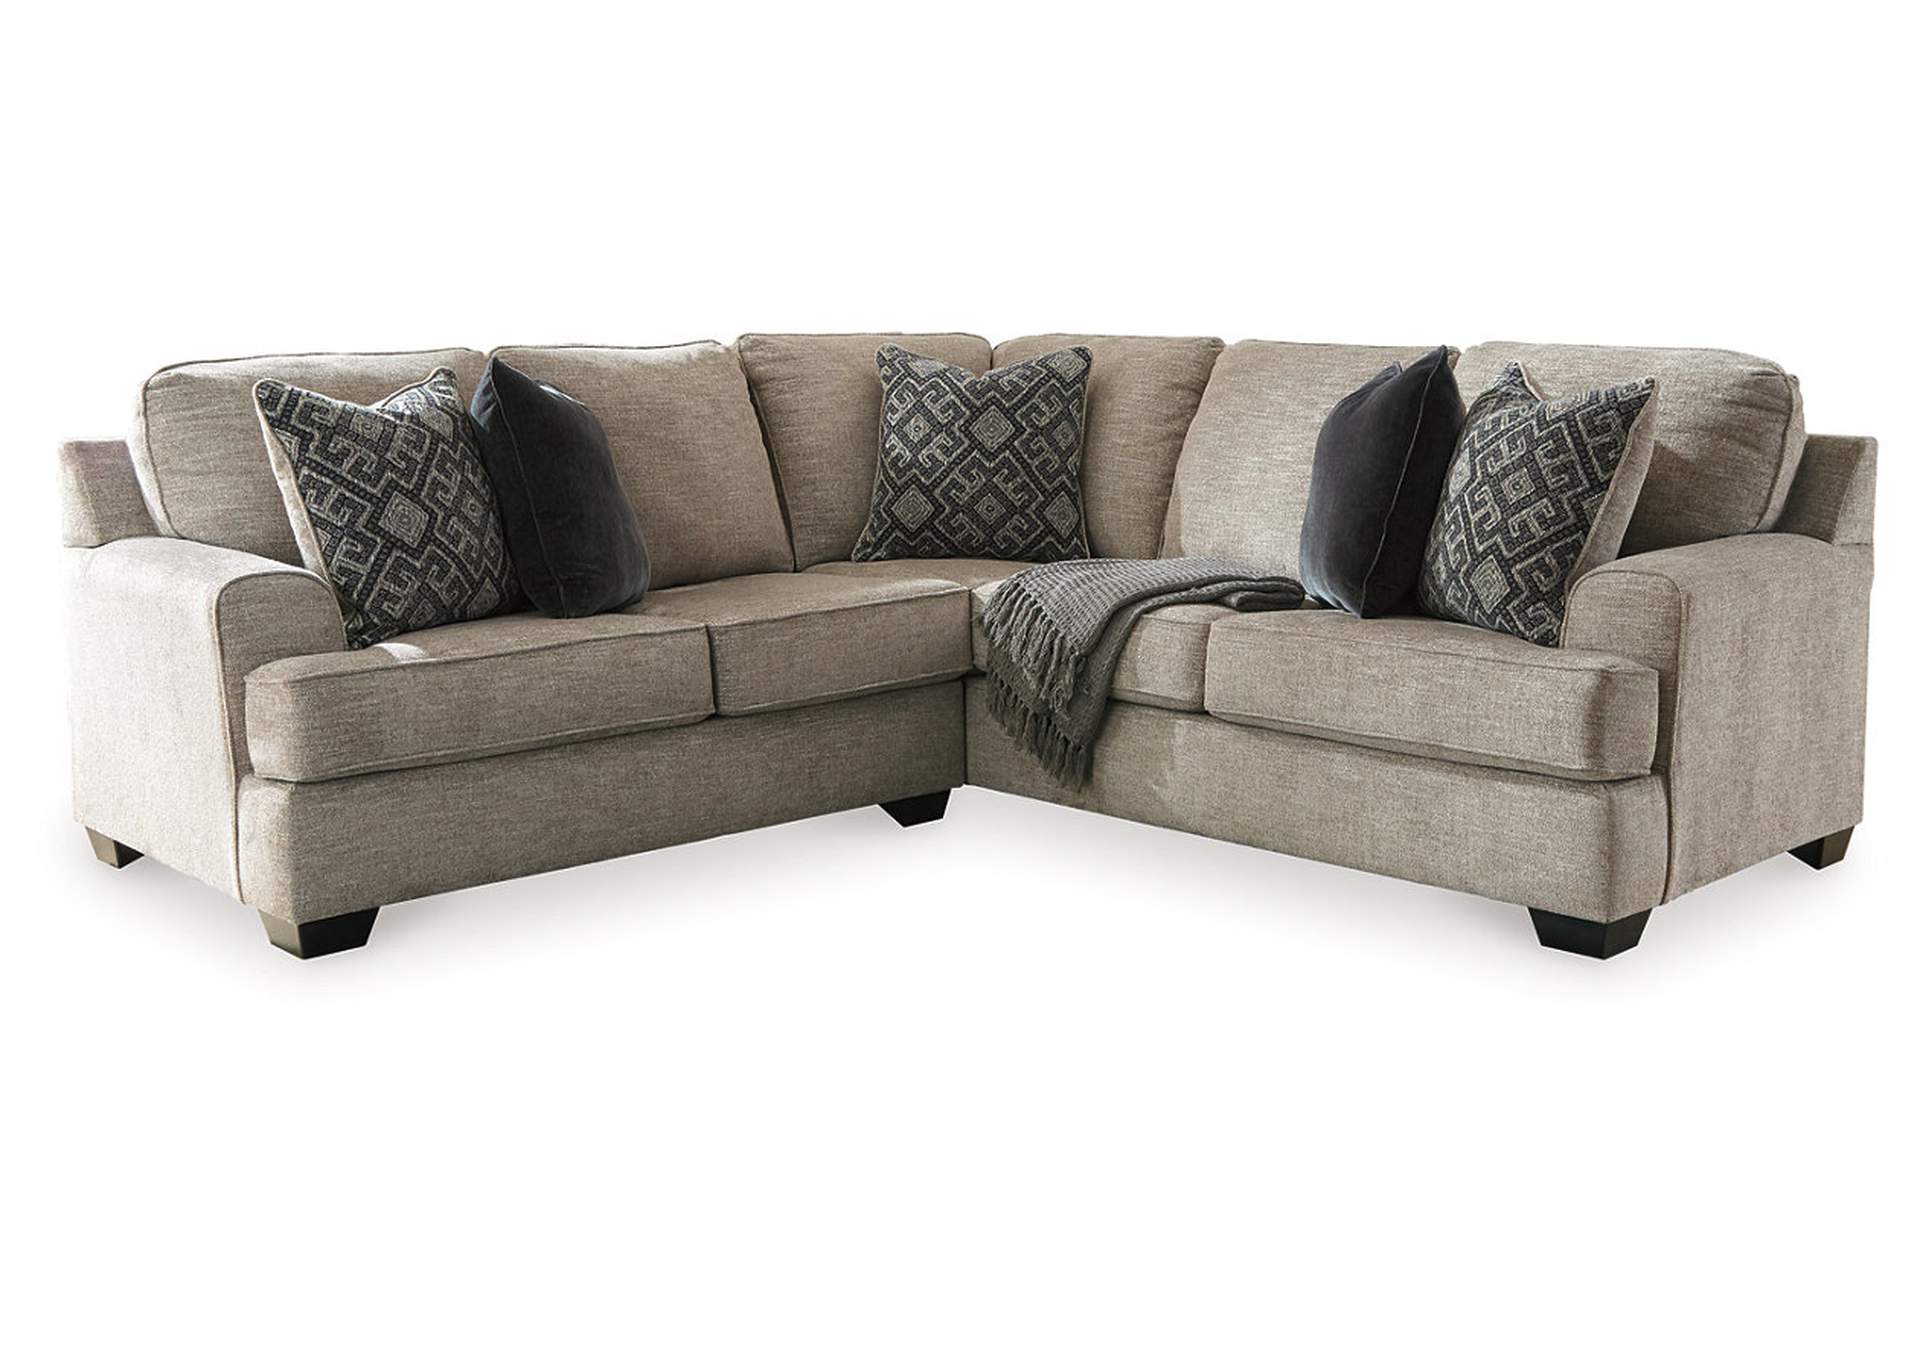 Bovarian 2-Piece Sectional,Signature Design By Ashley